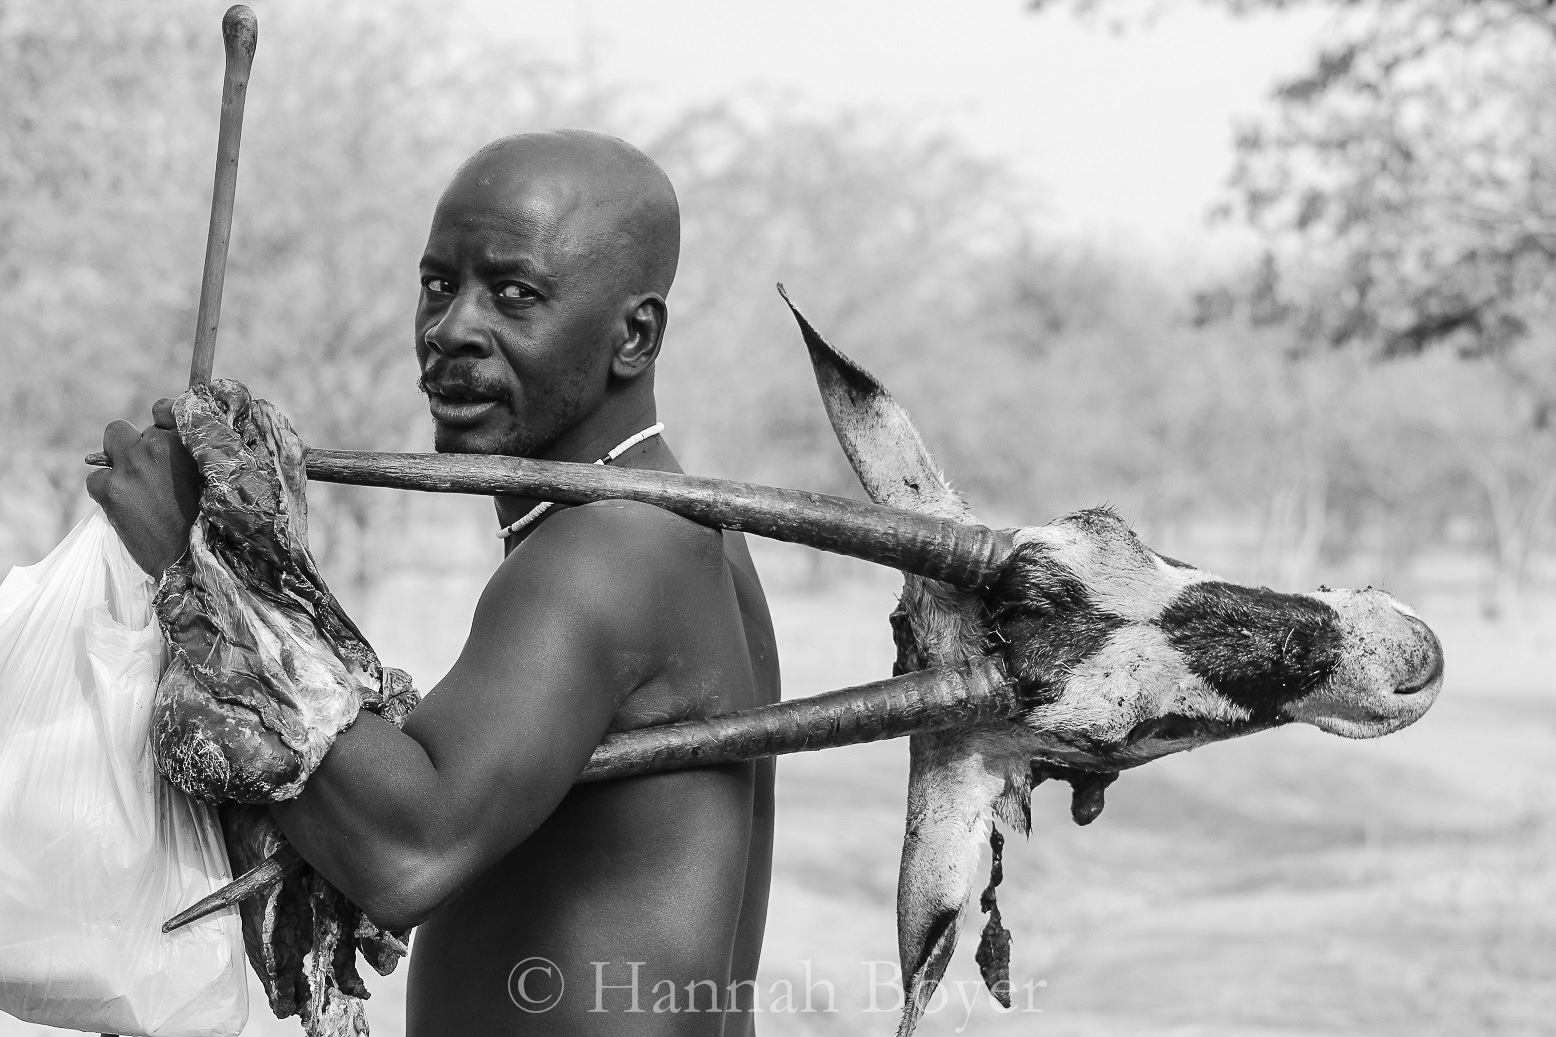 A Himba bushman totes home the head and entails of an orxy to feed himself and his family. This is just one of the many examples of game meat consumed on a regular basis by indigenous Namibians.